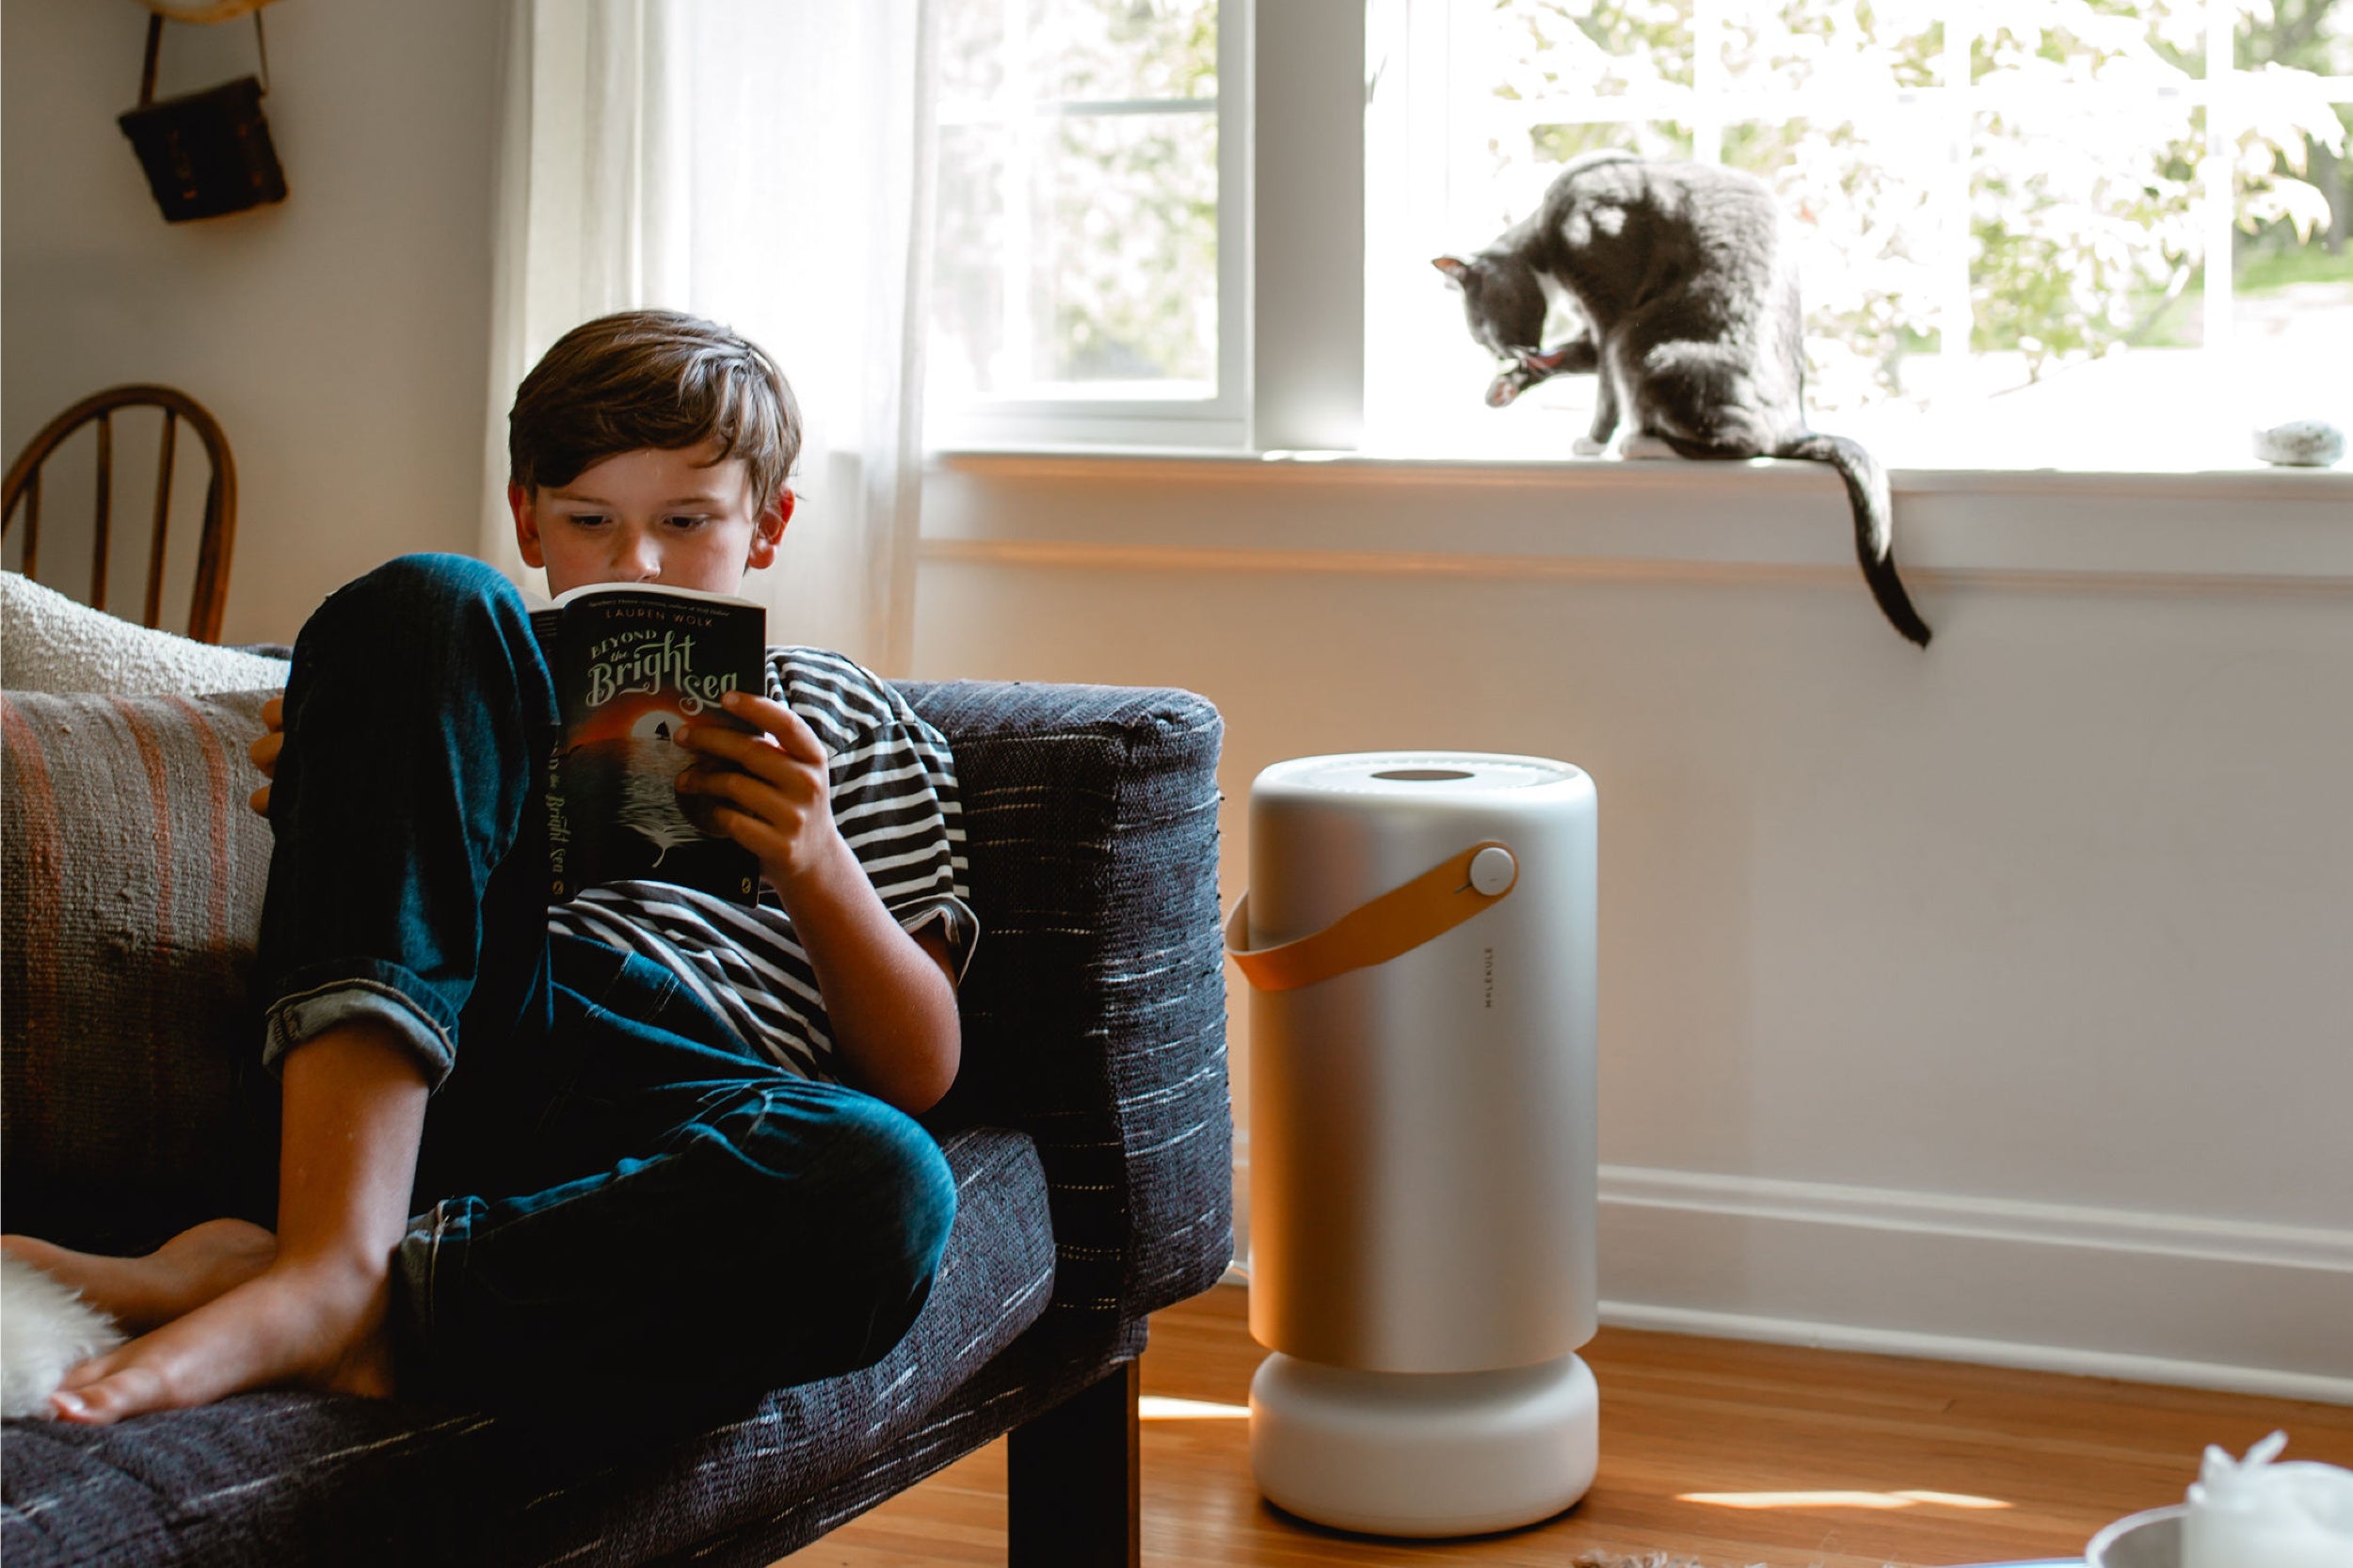 A young boy sits, reading a comic book. Nearby, a gray cat sits on the windowsill just above a Molekule Air Purifier.